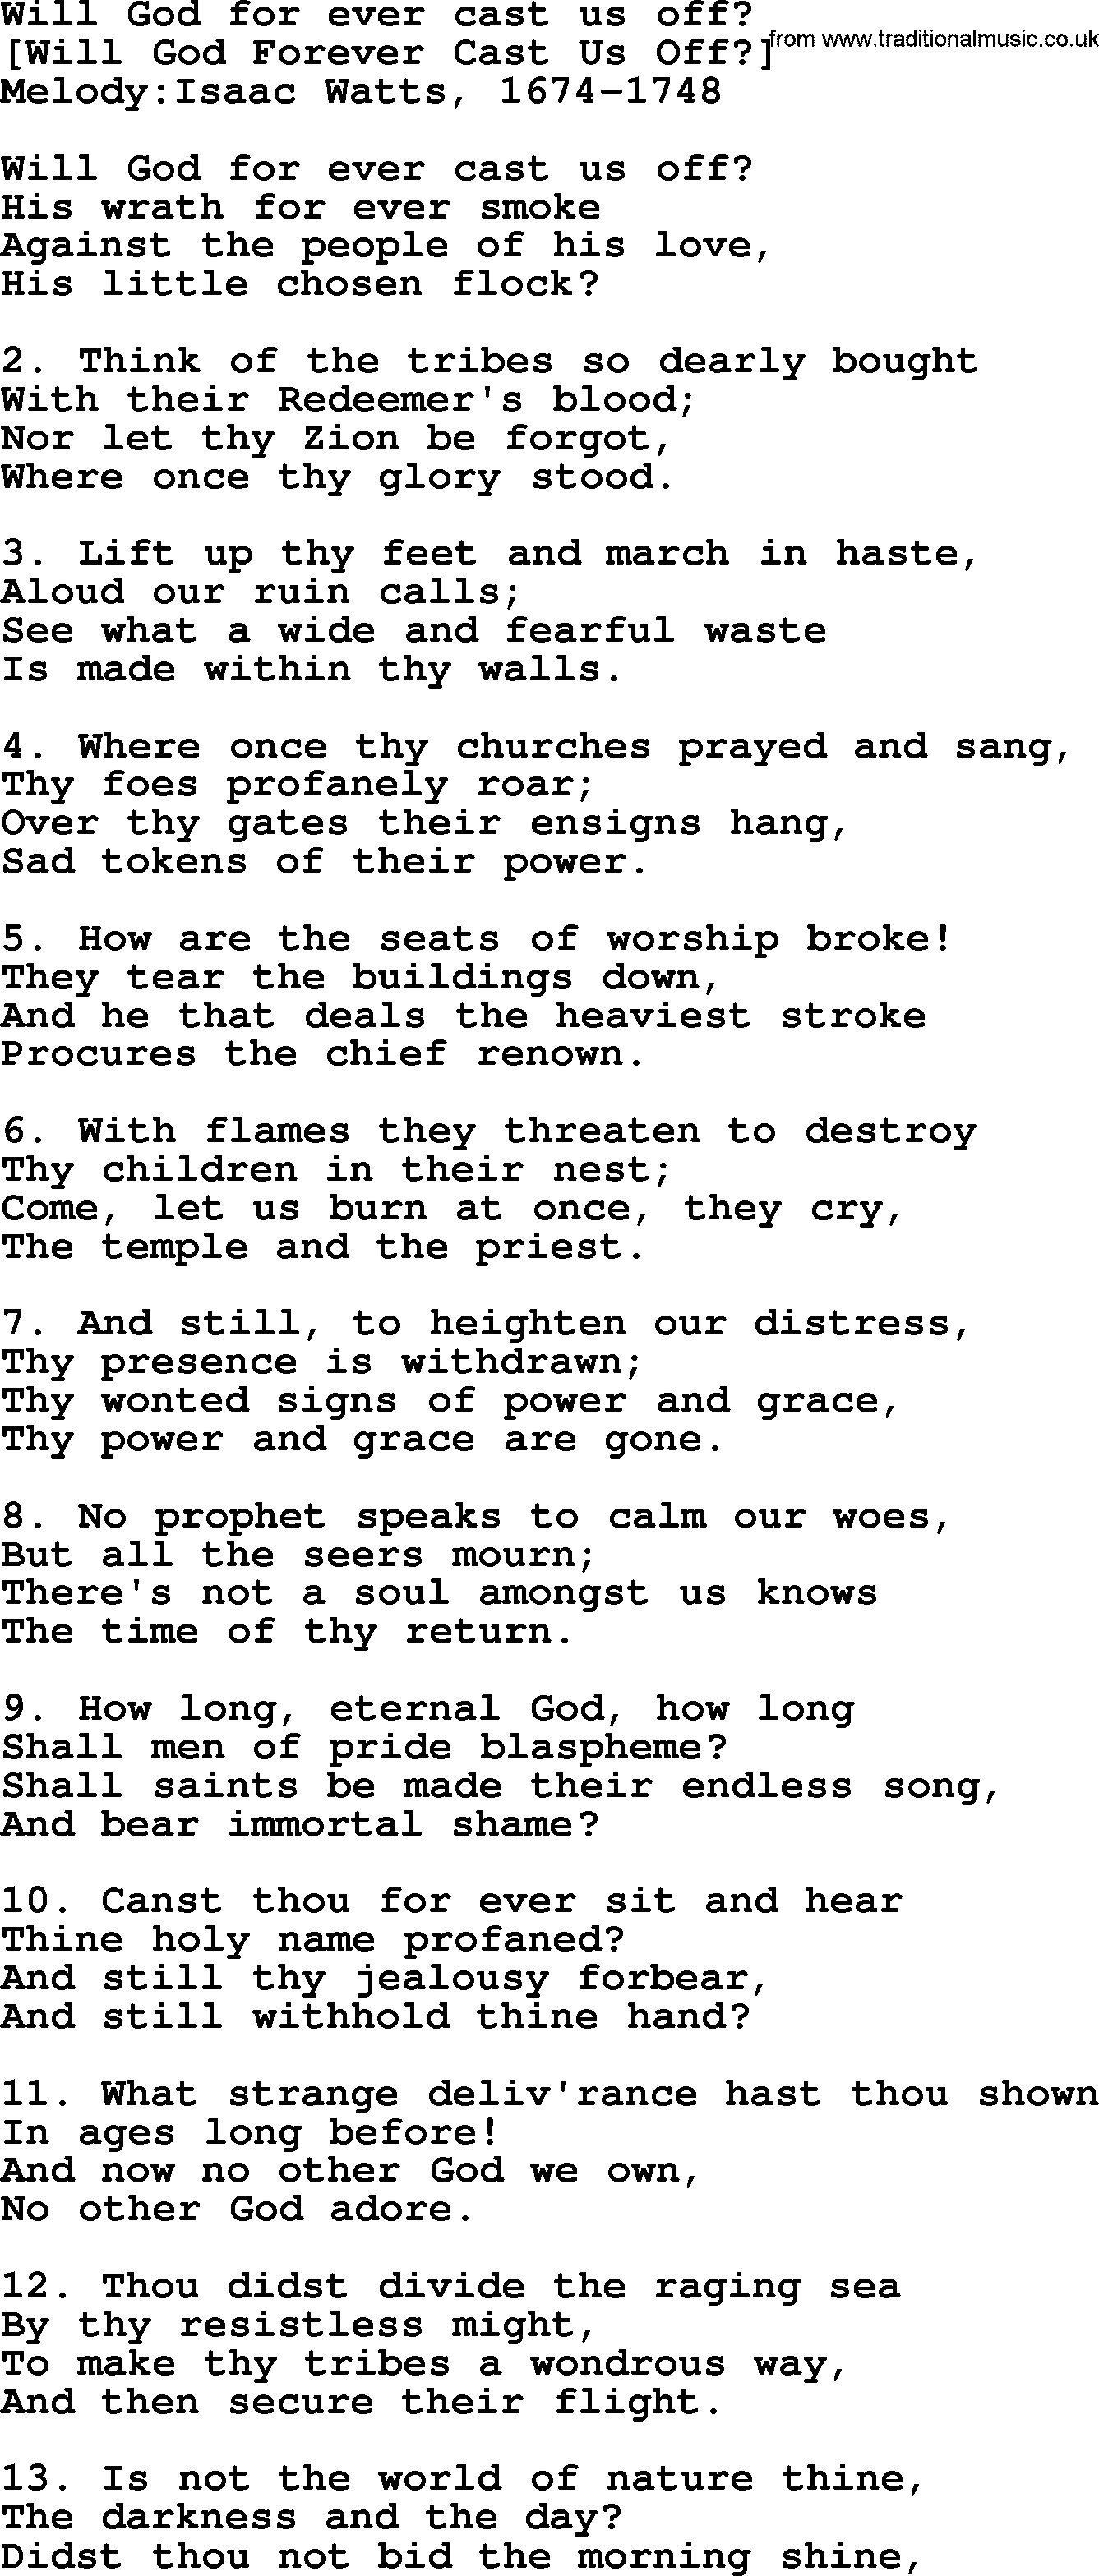 Old English Song: Will God For Ever Cast Us Off lyrics